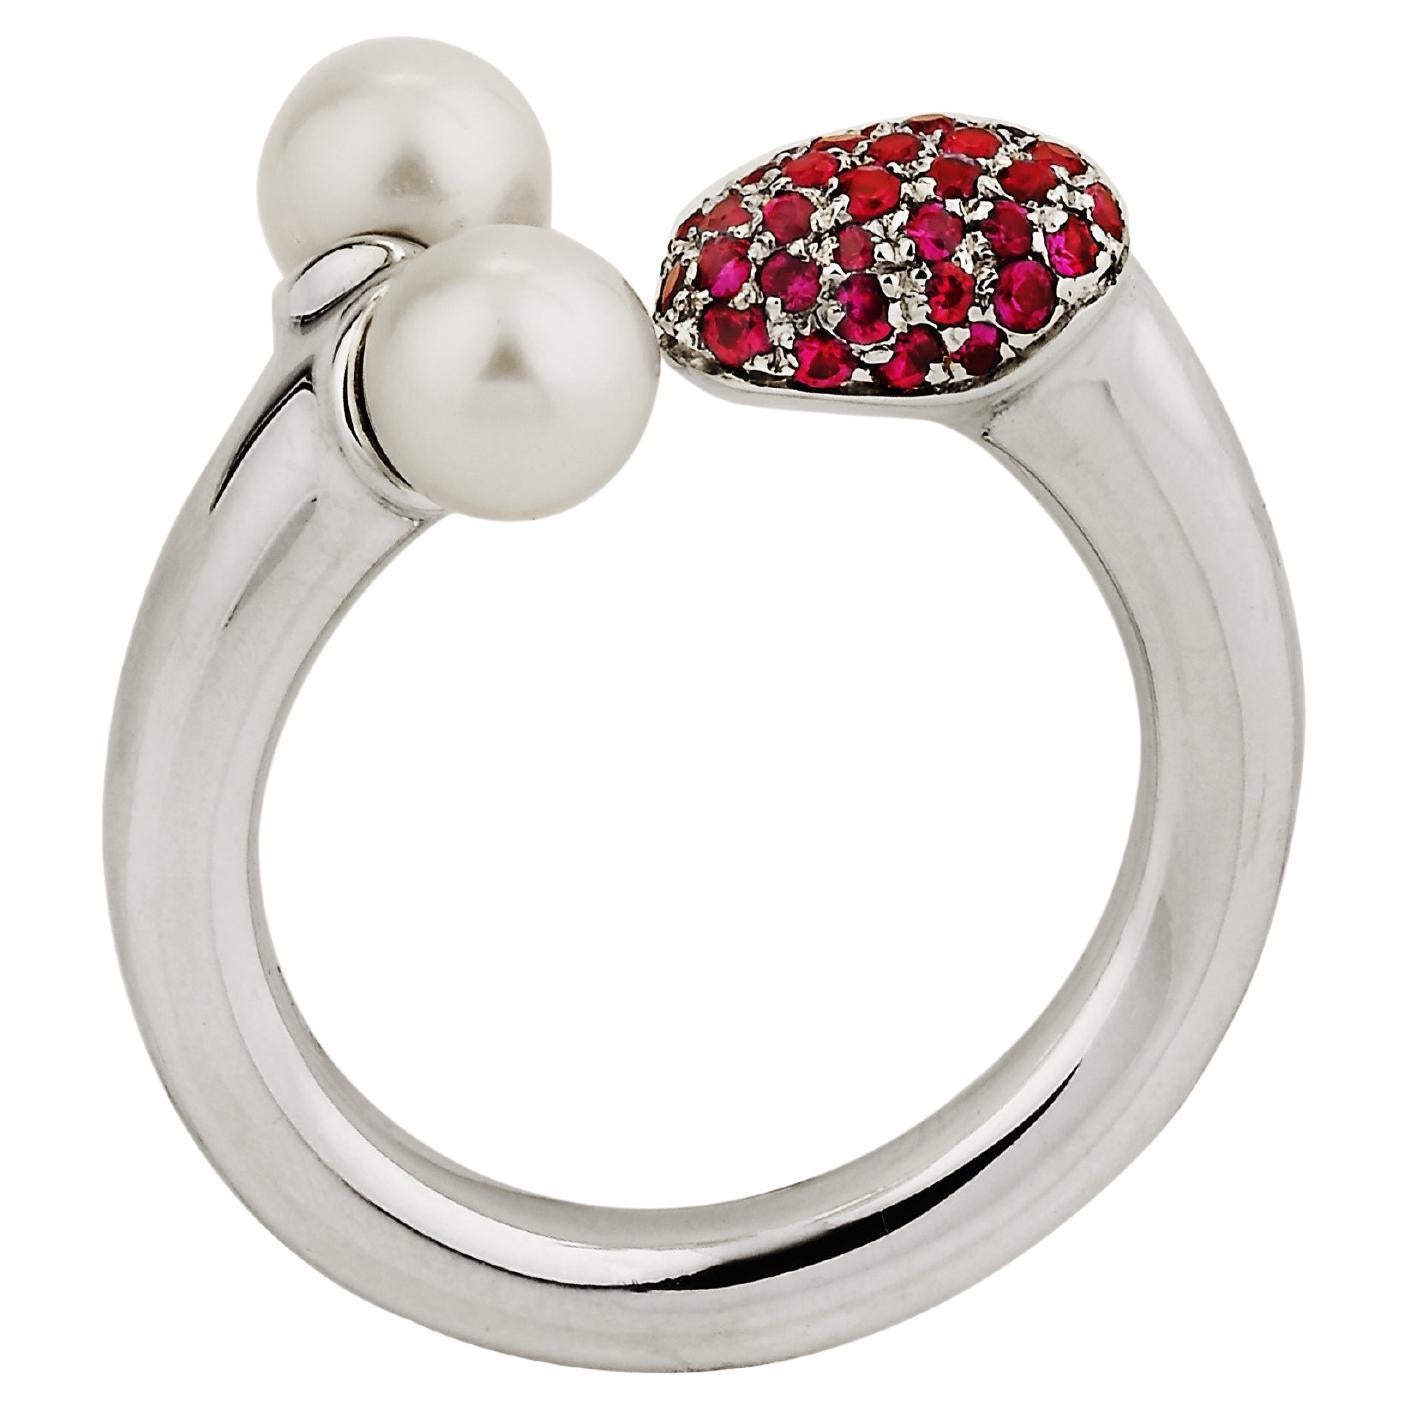 Betony Vernon "Sleeping Ring" Small 18K Gold, Ruby and Pearls For Sale